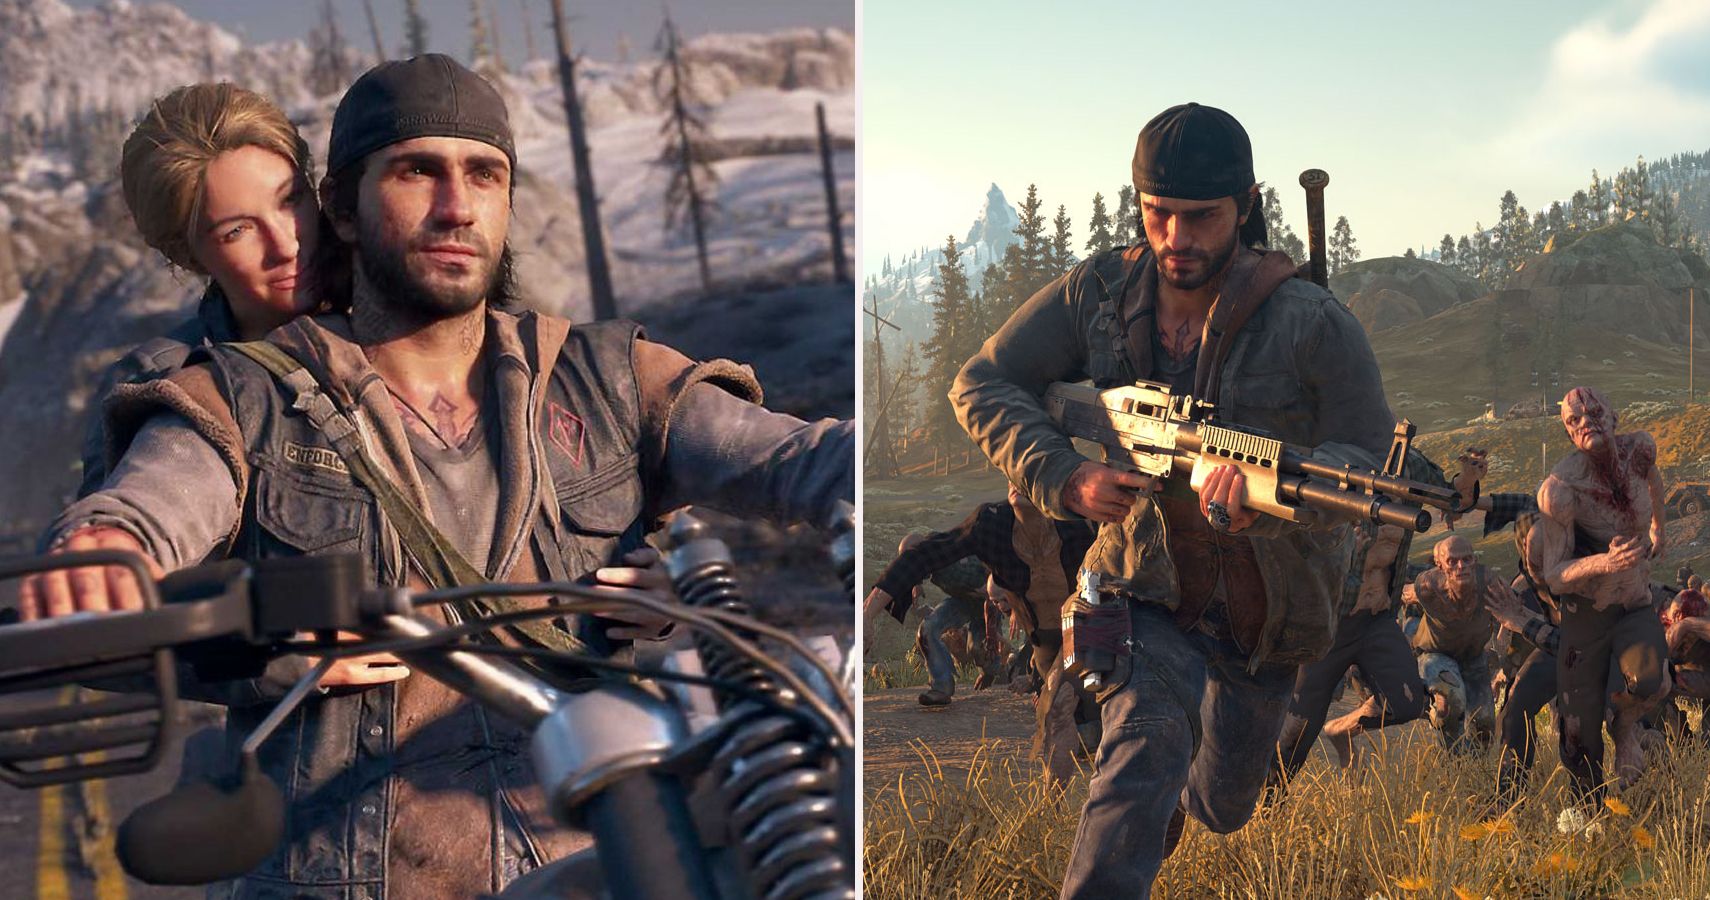 Days Gone' review: An ambitious zombie game with poor execution